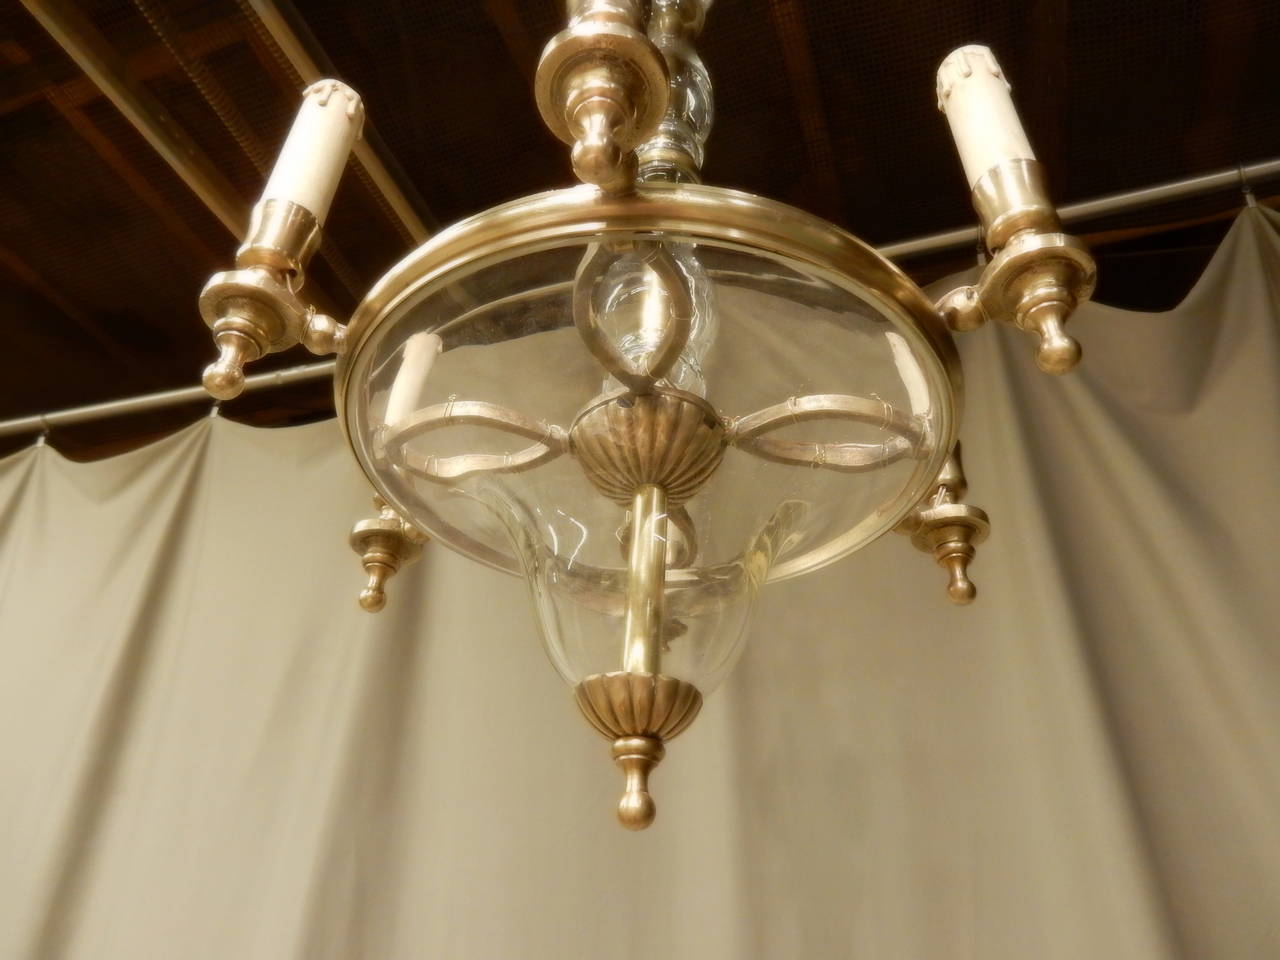 Very nice late 19th c. glass and brass European 6-lite chandelier. Has been rewired for U.S.  Comes with canopy that is 4 